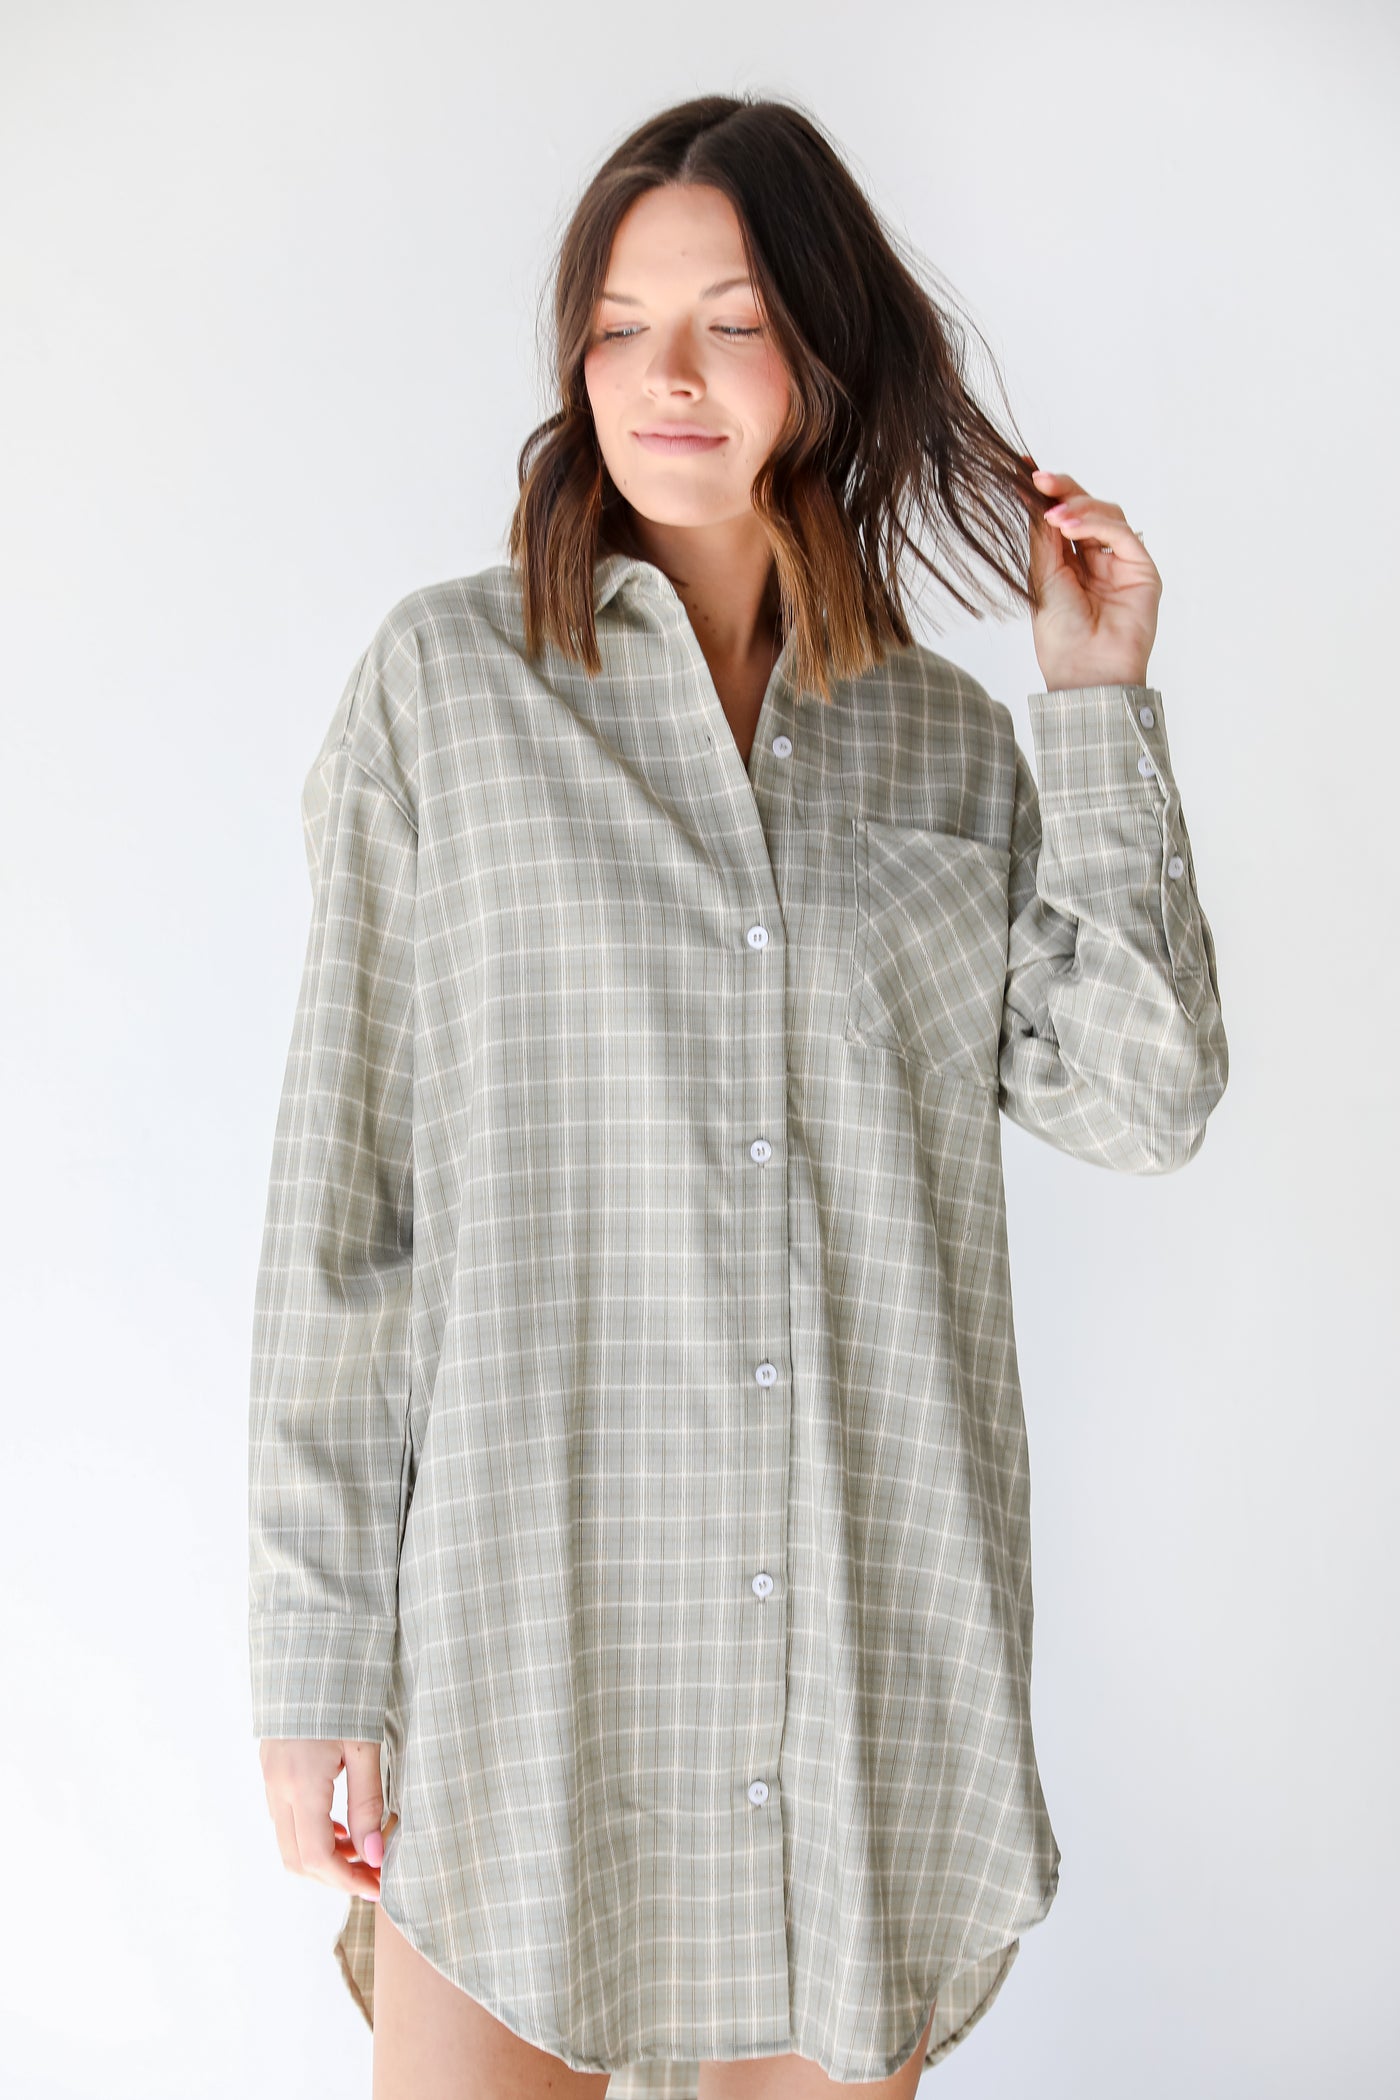 Plaid Tunic in sage on model